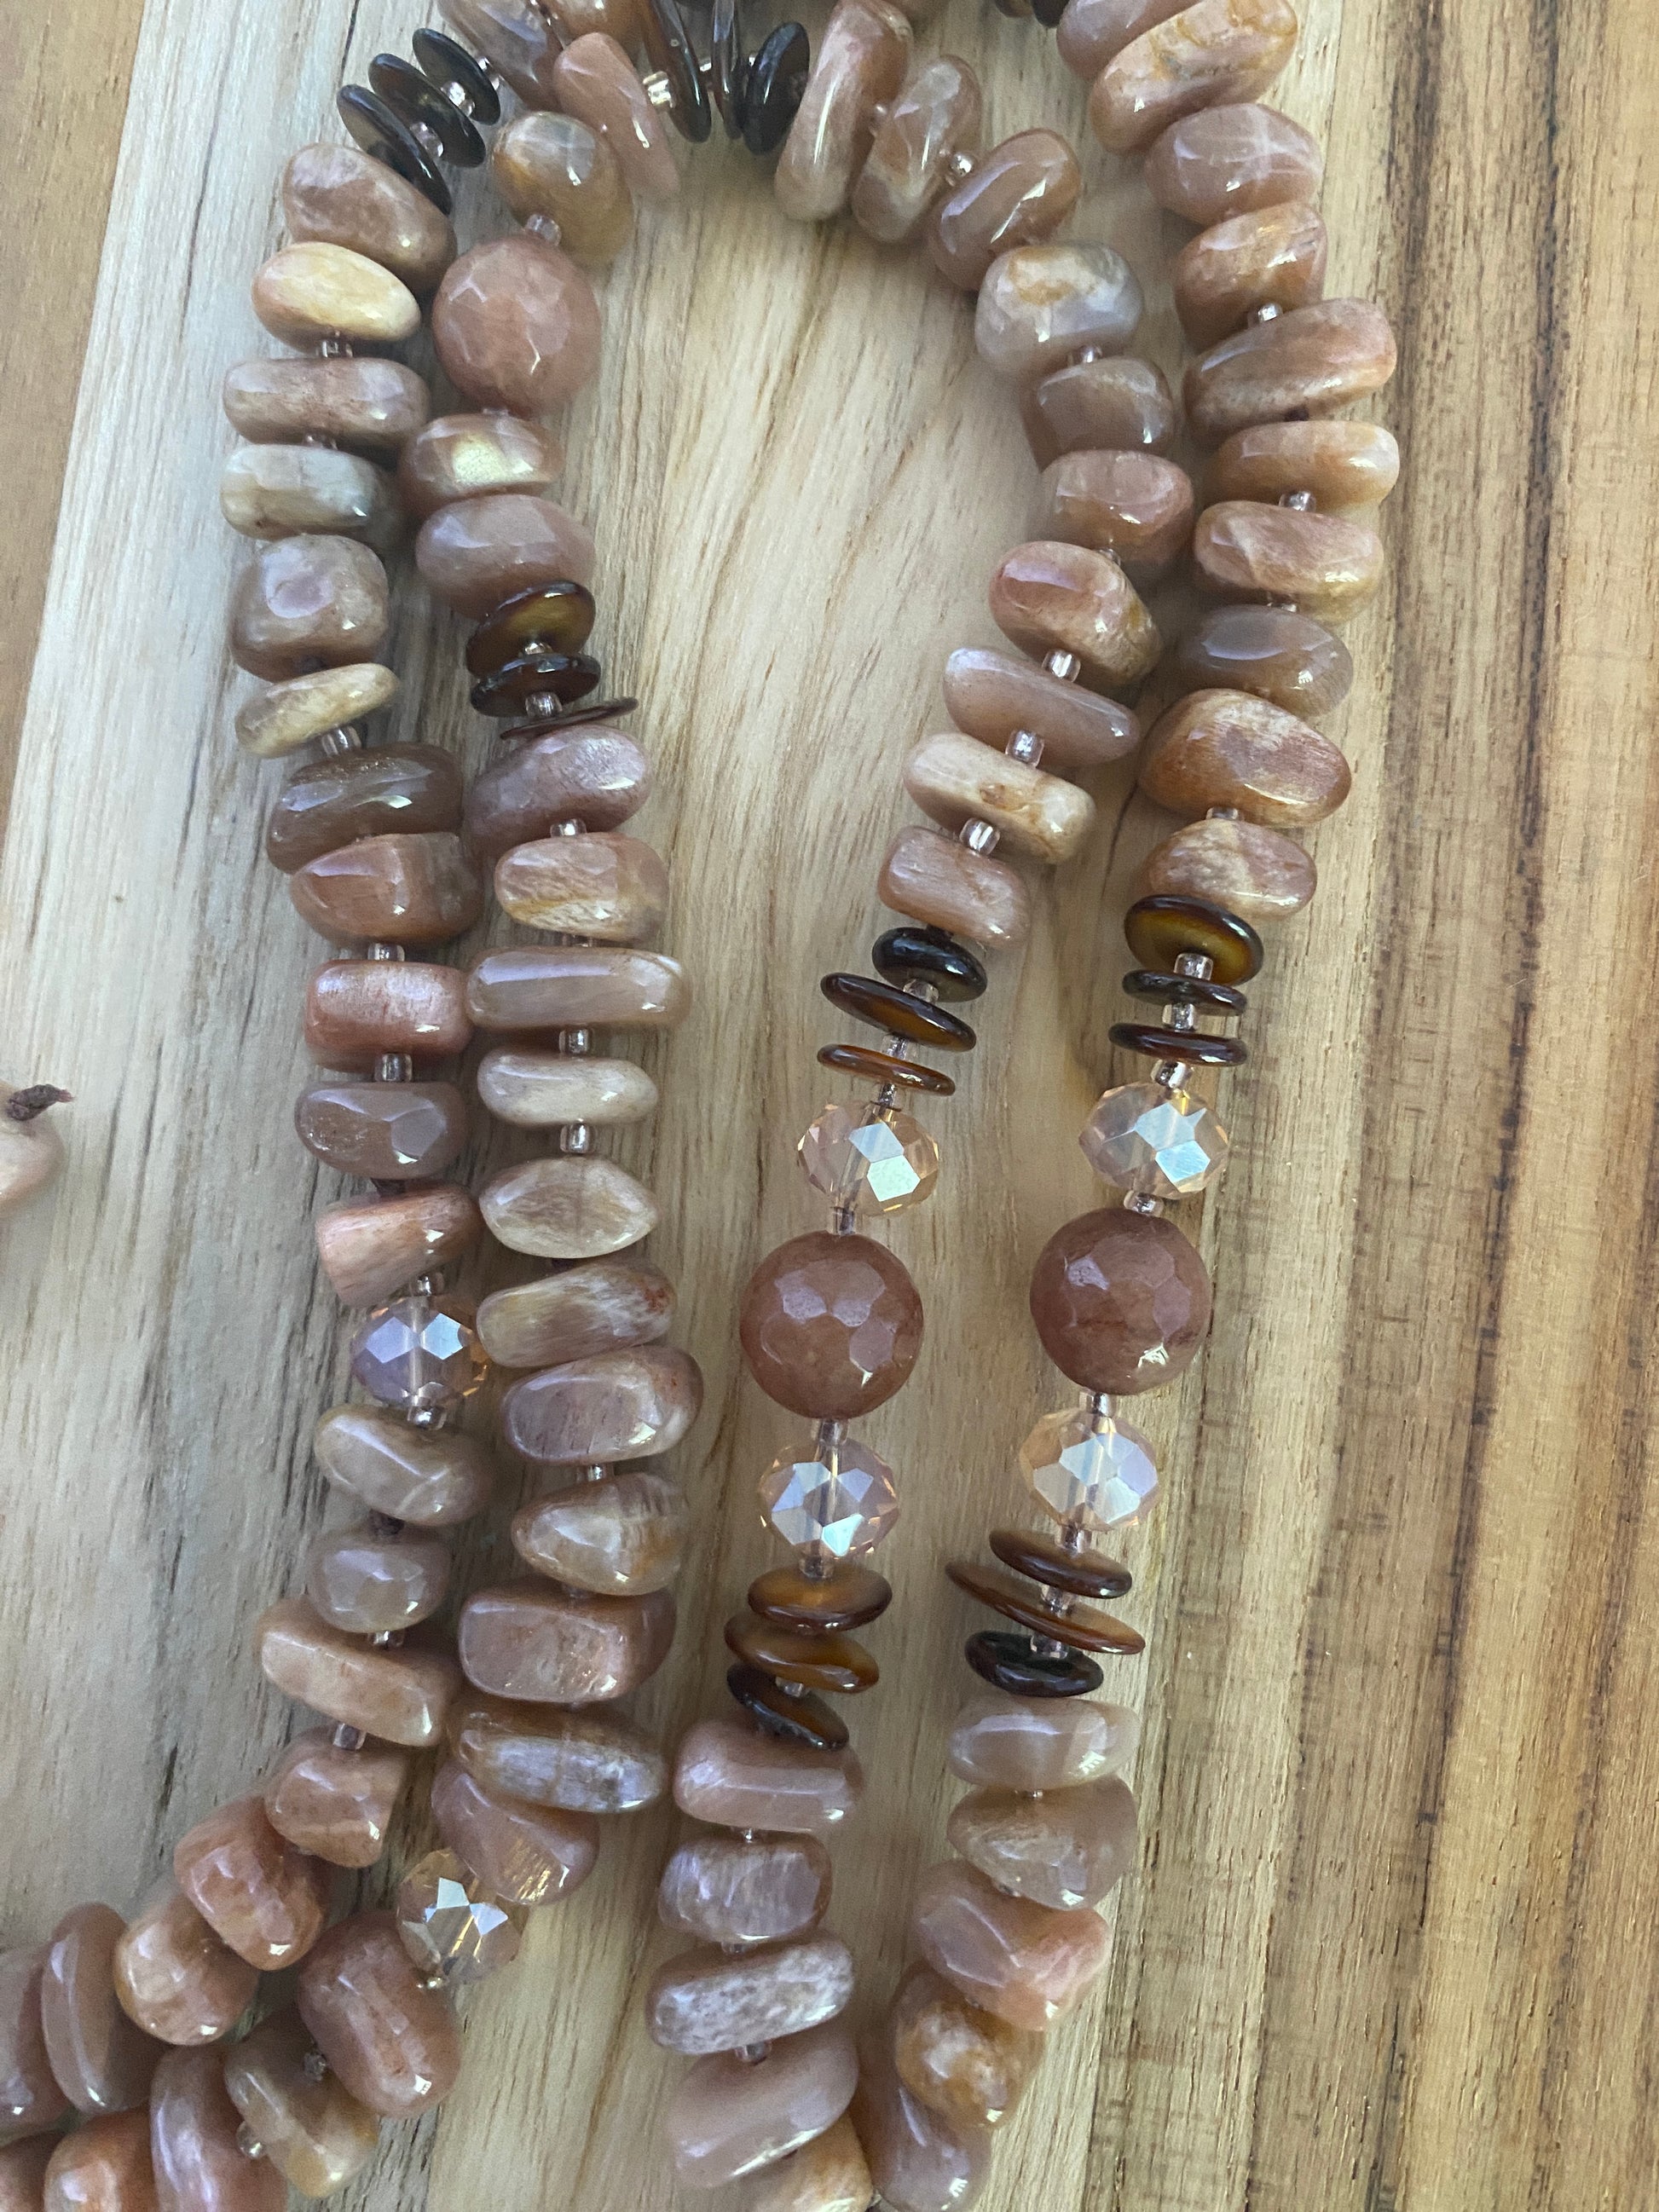 28" Long Ayaka Agate Beaded Pendant Necklace with Sunstone, Shell & Agate Beads - My Urban Gems